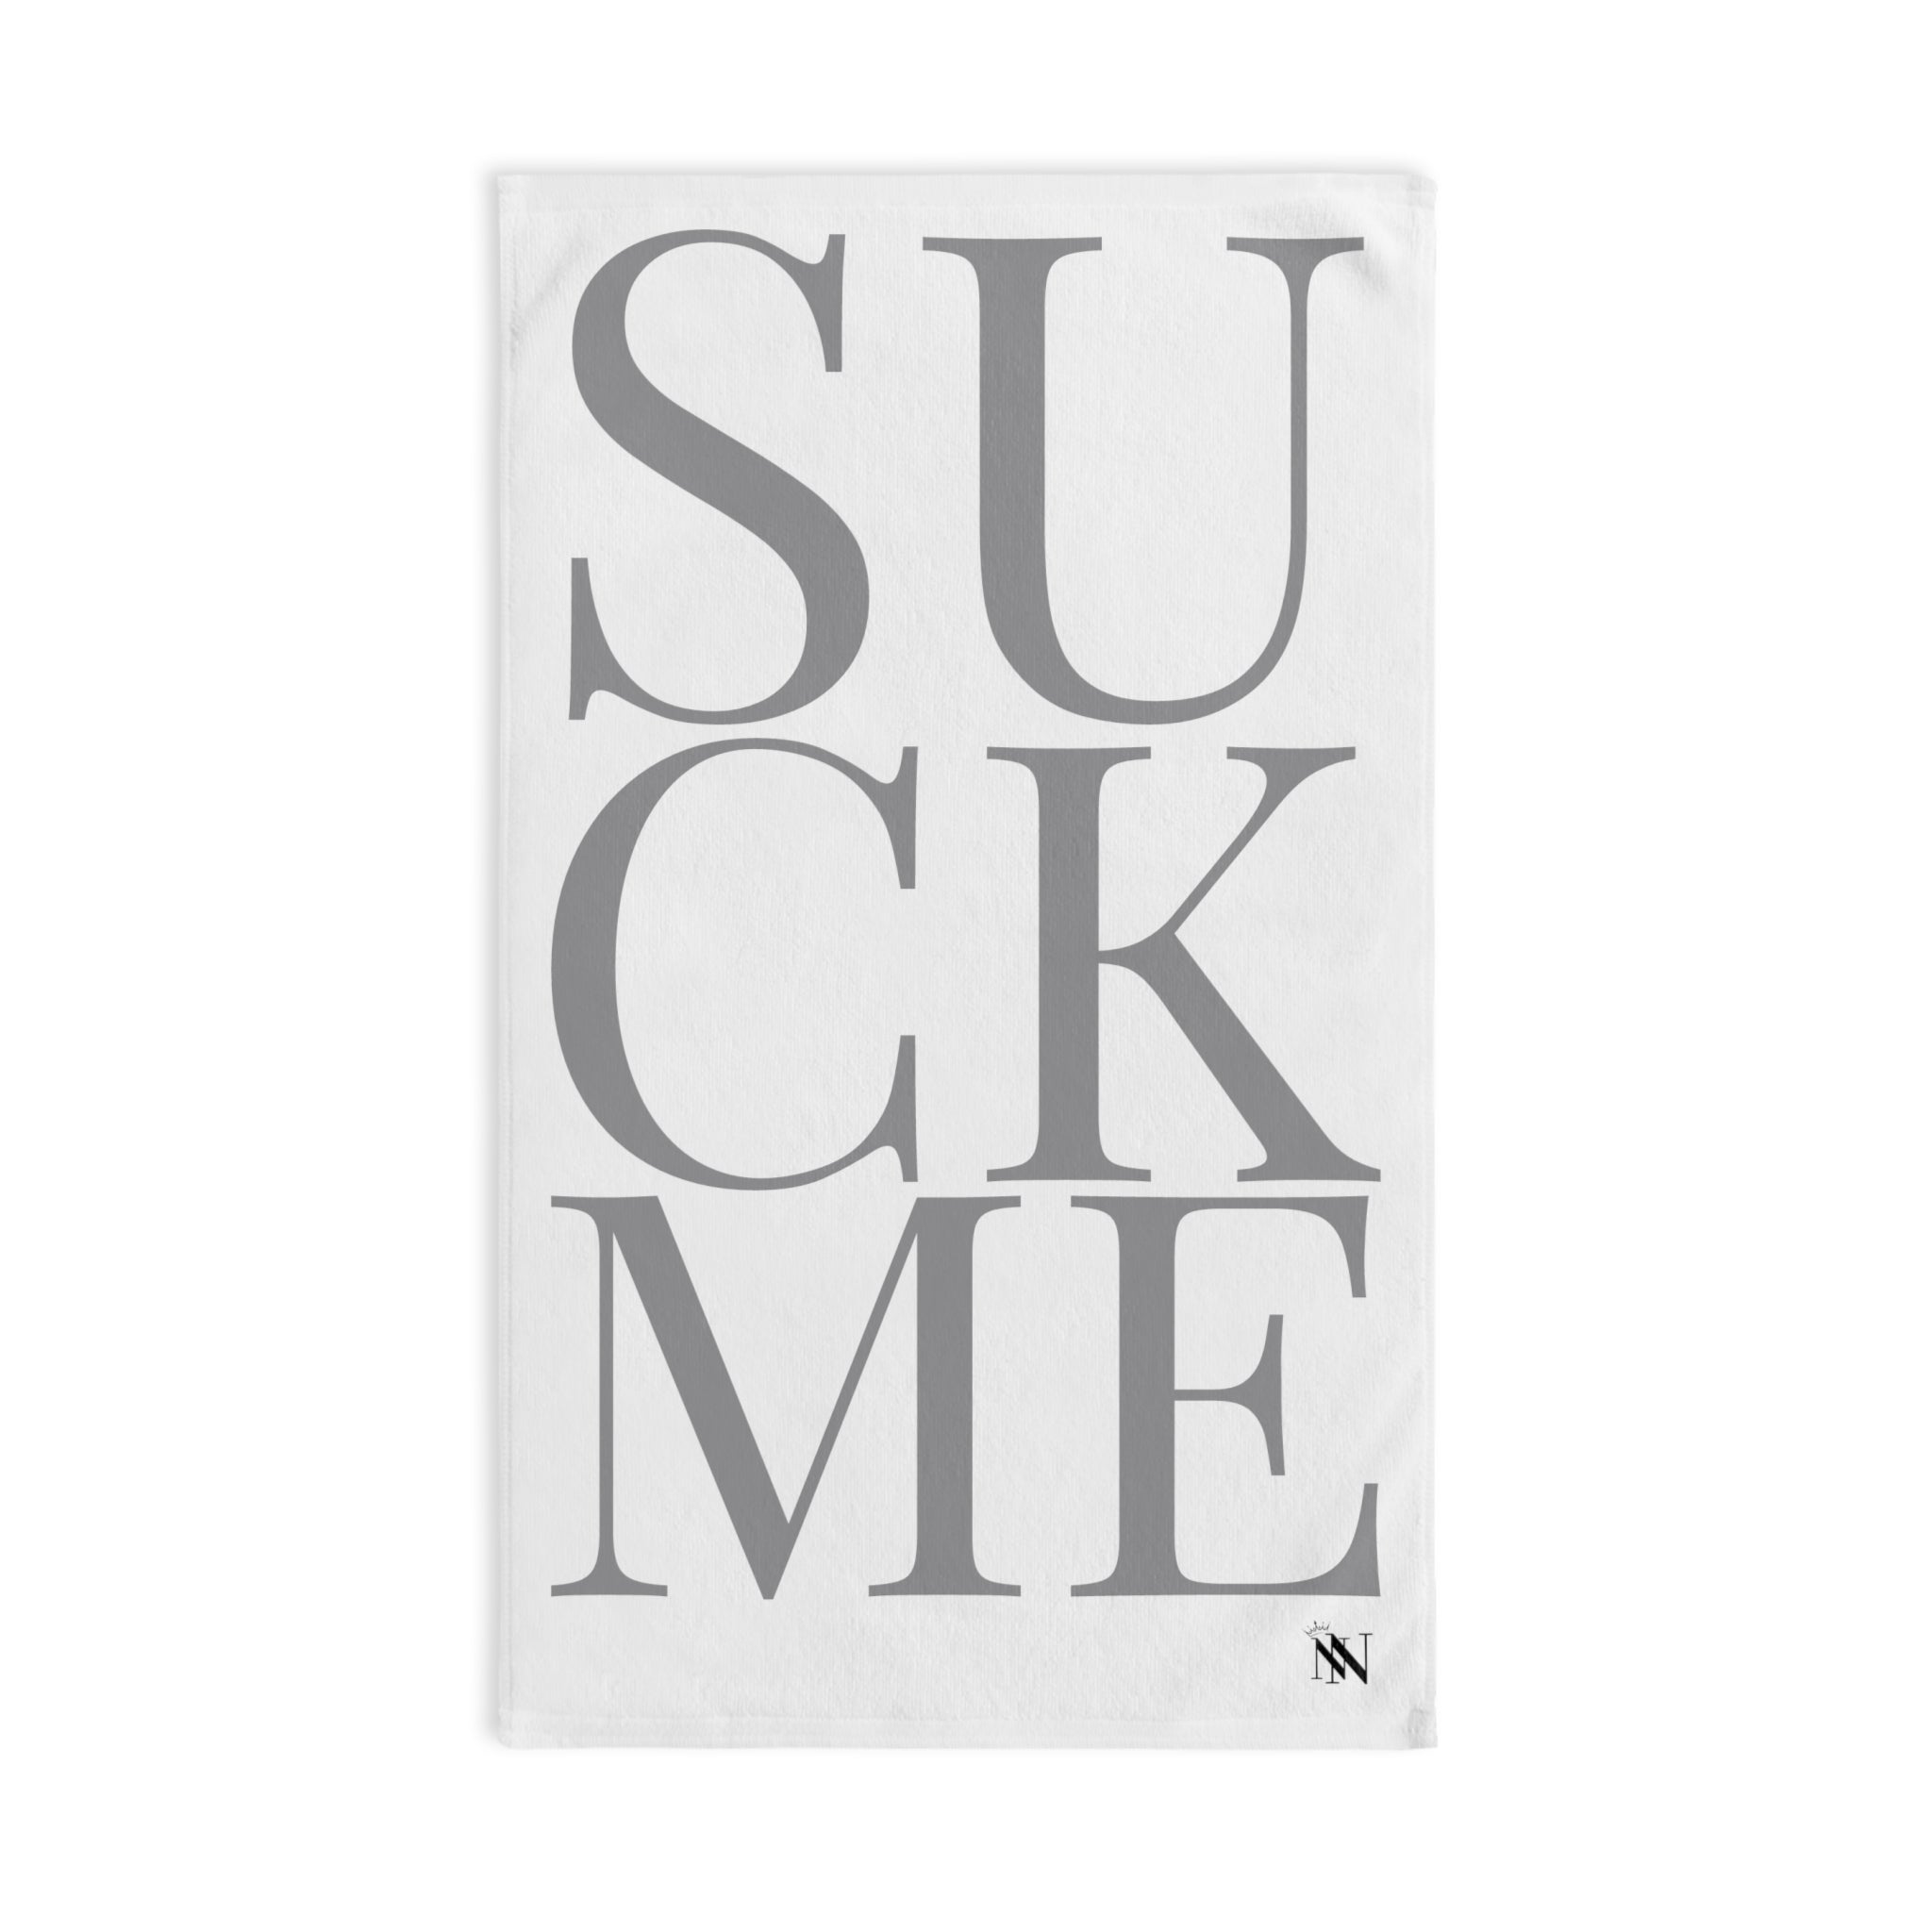 Grey Suck Me White | Funny Gifts for Men - Gifts for Him - Birthday Gifts for Men, Him, Her, Husband, Boyfriend, Girlfriend, New Couple Gifts, Fathers & Valentines Day Gifts, Christmas Gifts NECTAR NAPKINS